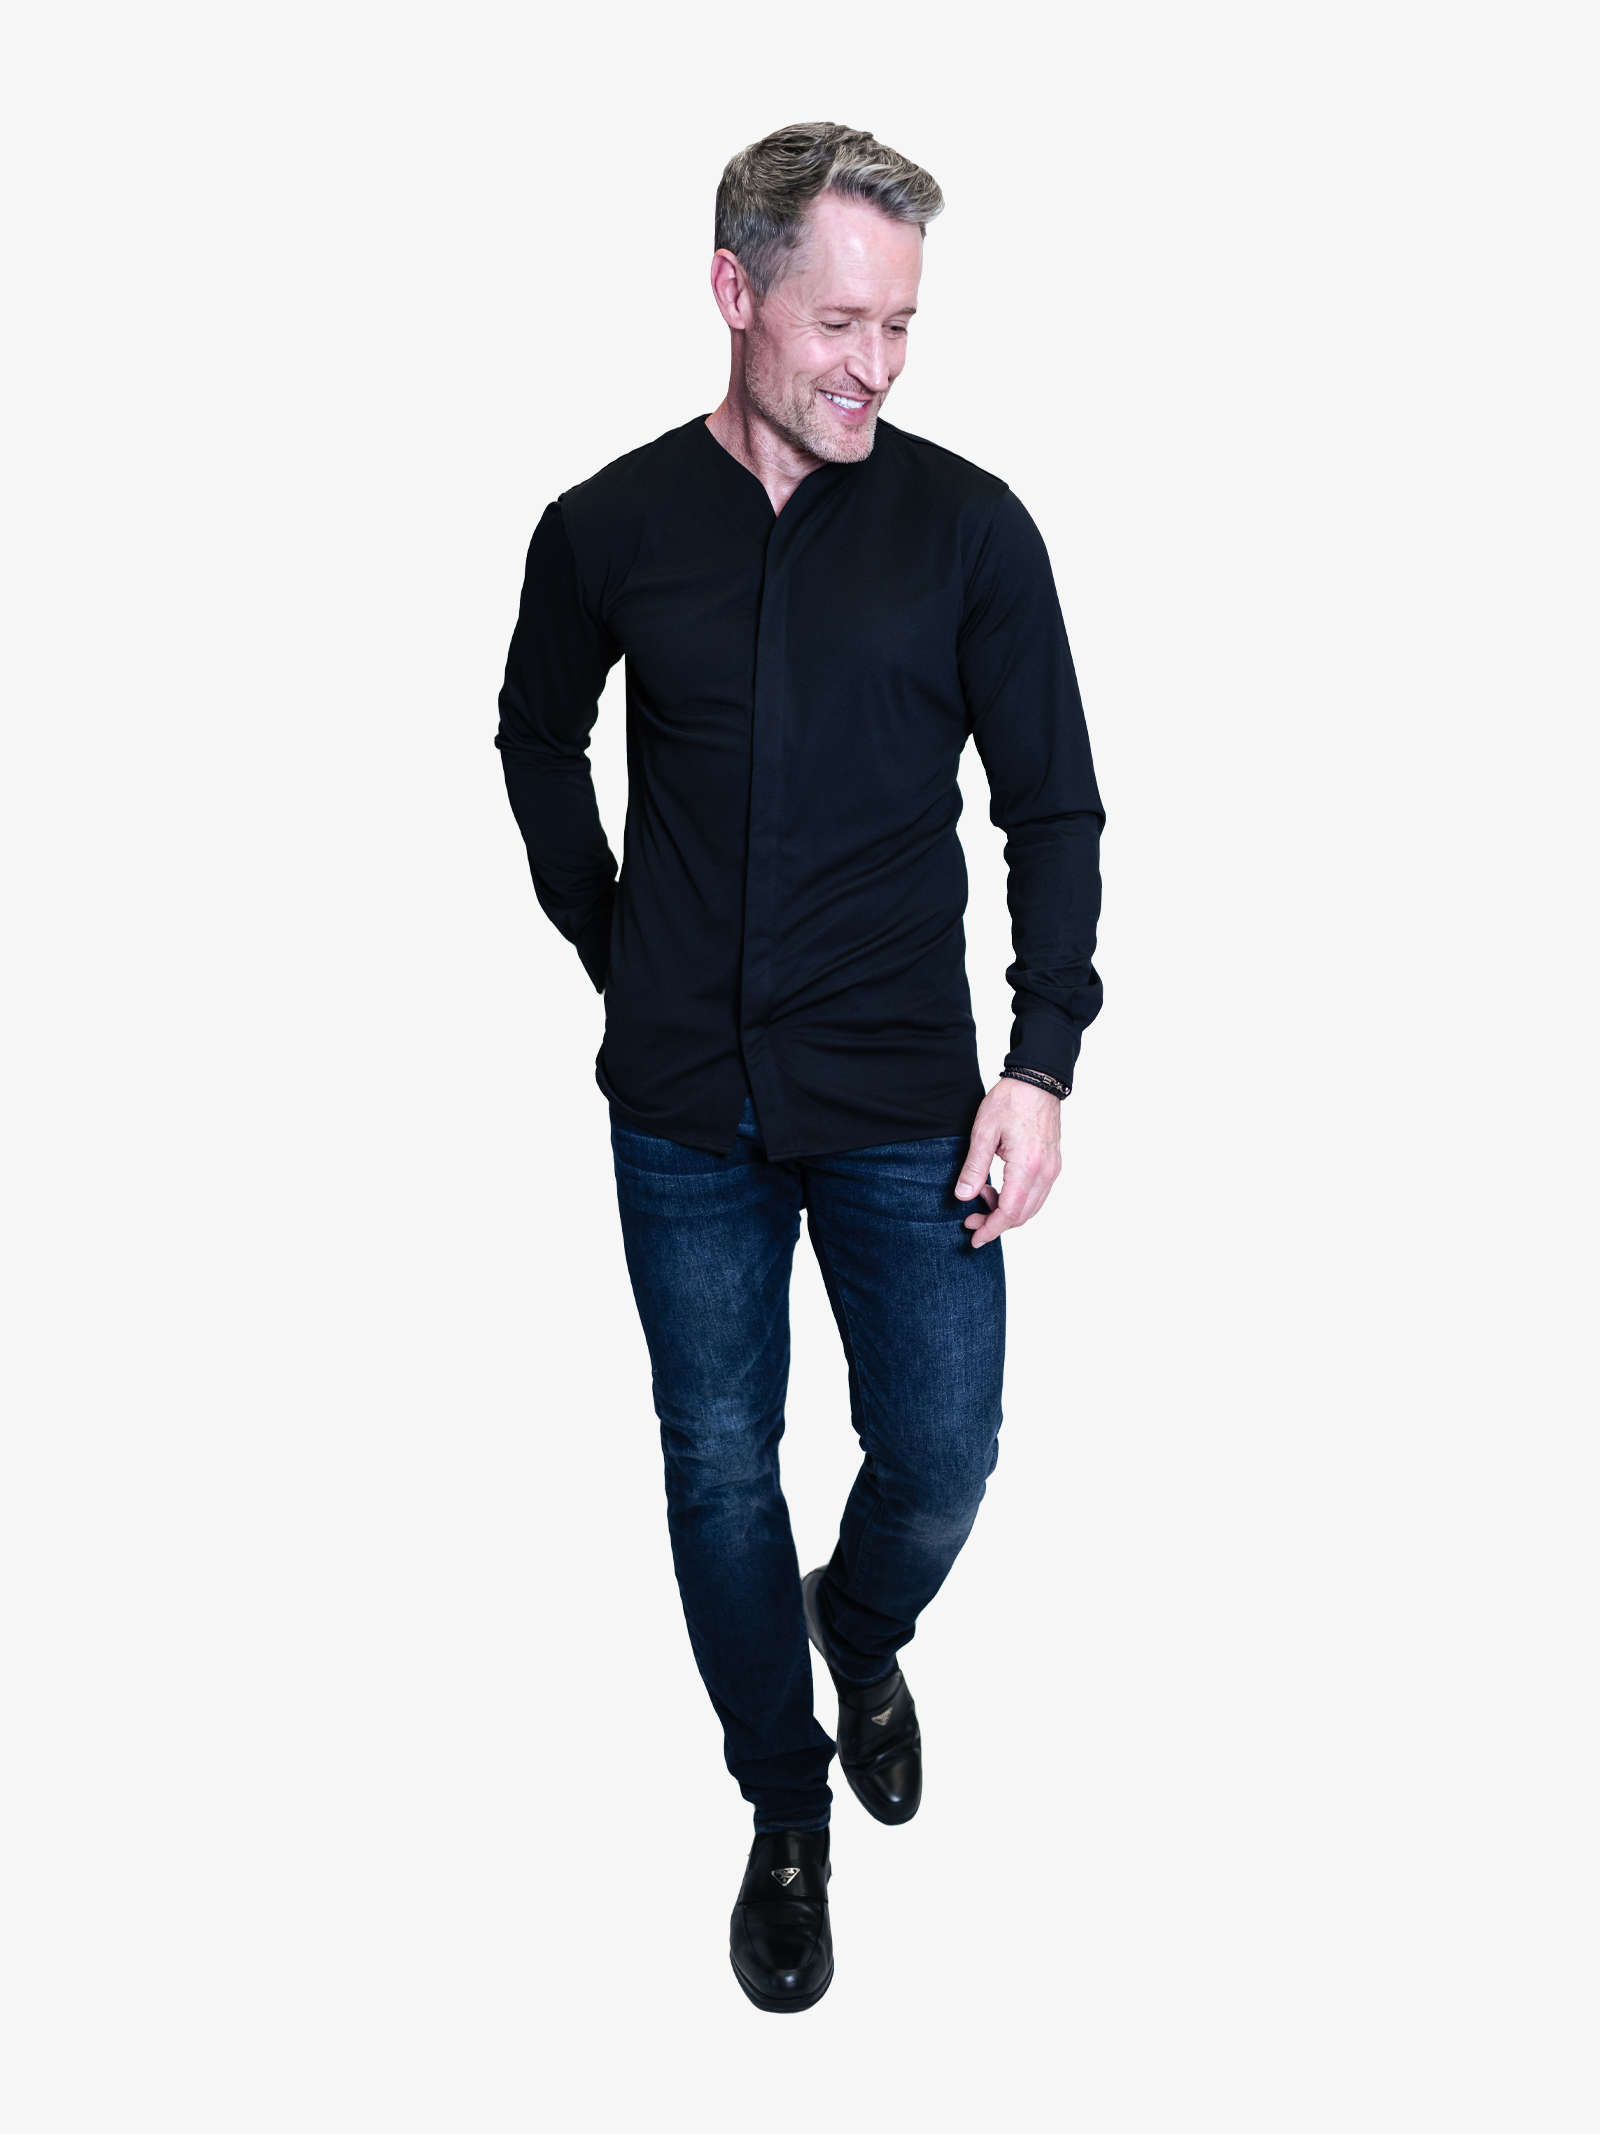 Man wearing a black dress shirt that is collarless with a nice pair of blue jeans. Worn untucked with black dress shoes